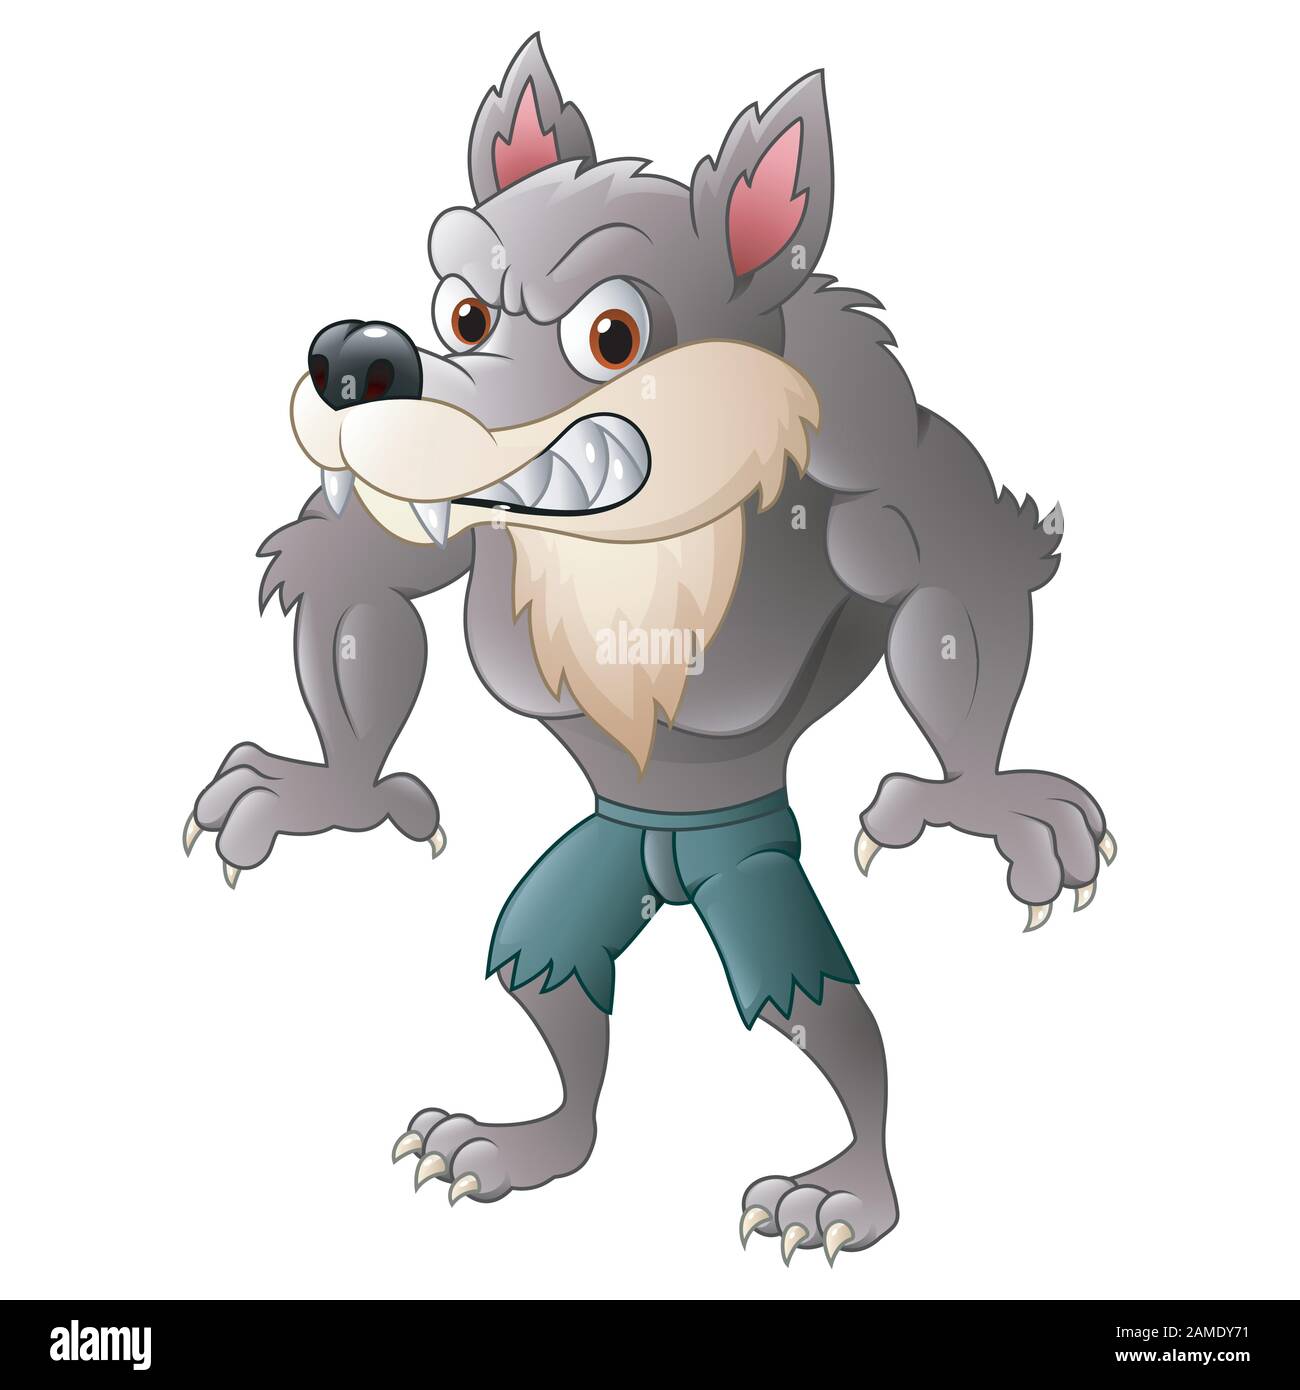 Cartoon Werewolf Stock Vector Image Art Alamy Alamy is undoubtedly one of the largest online collections of stock photography in the world. https www alamy com cartoon werewolf image339596853 html